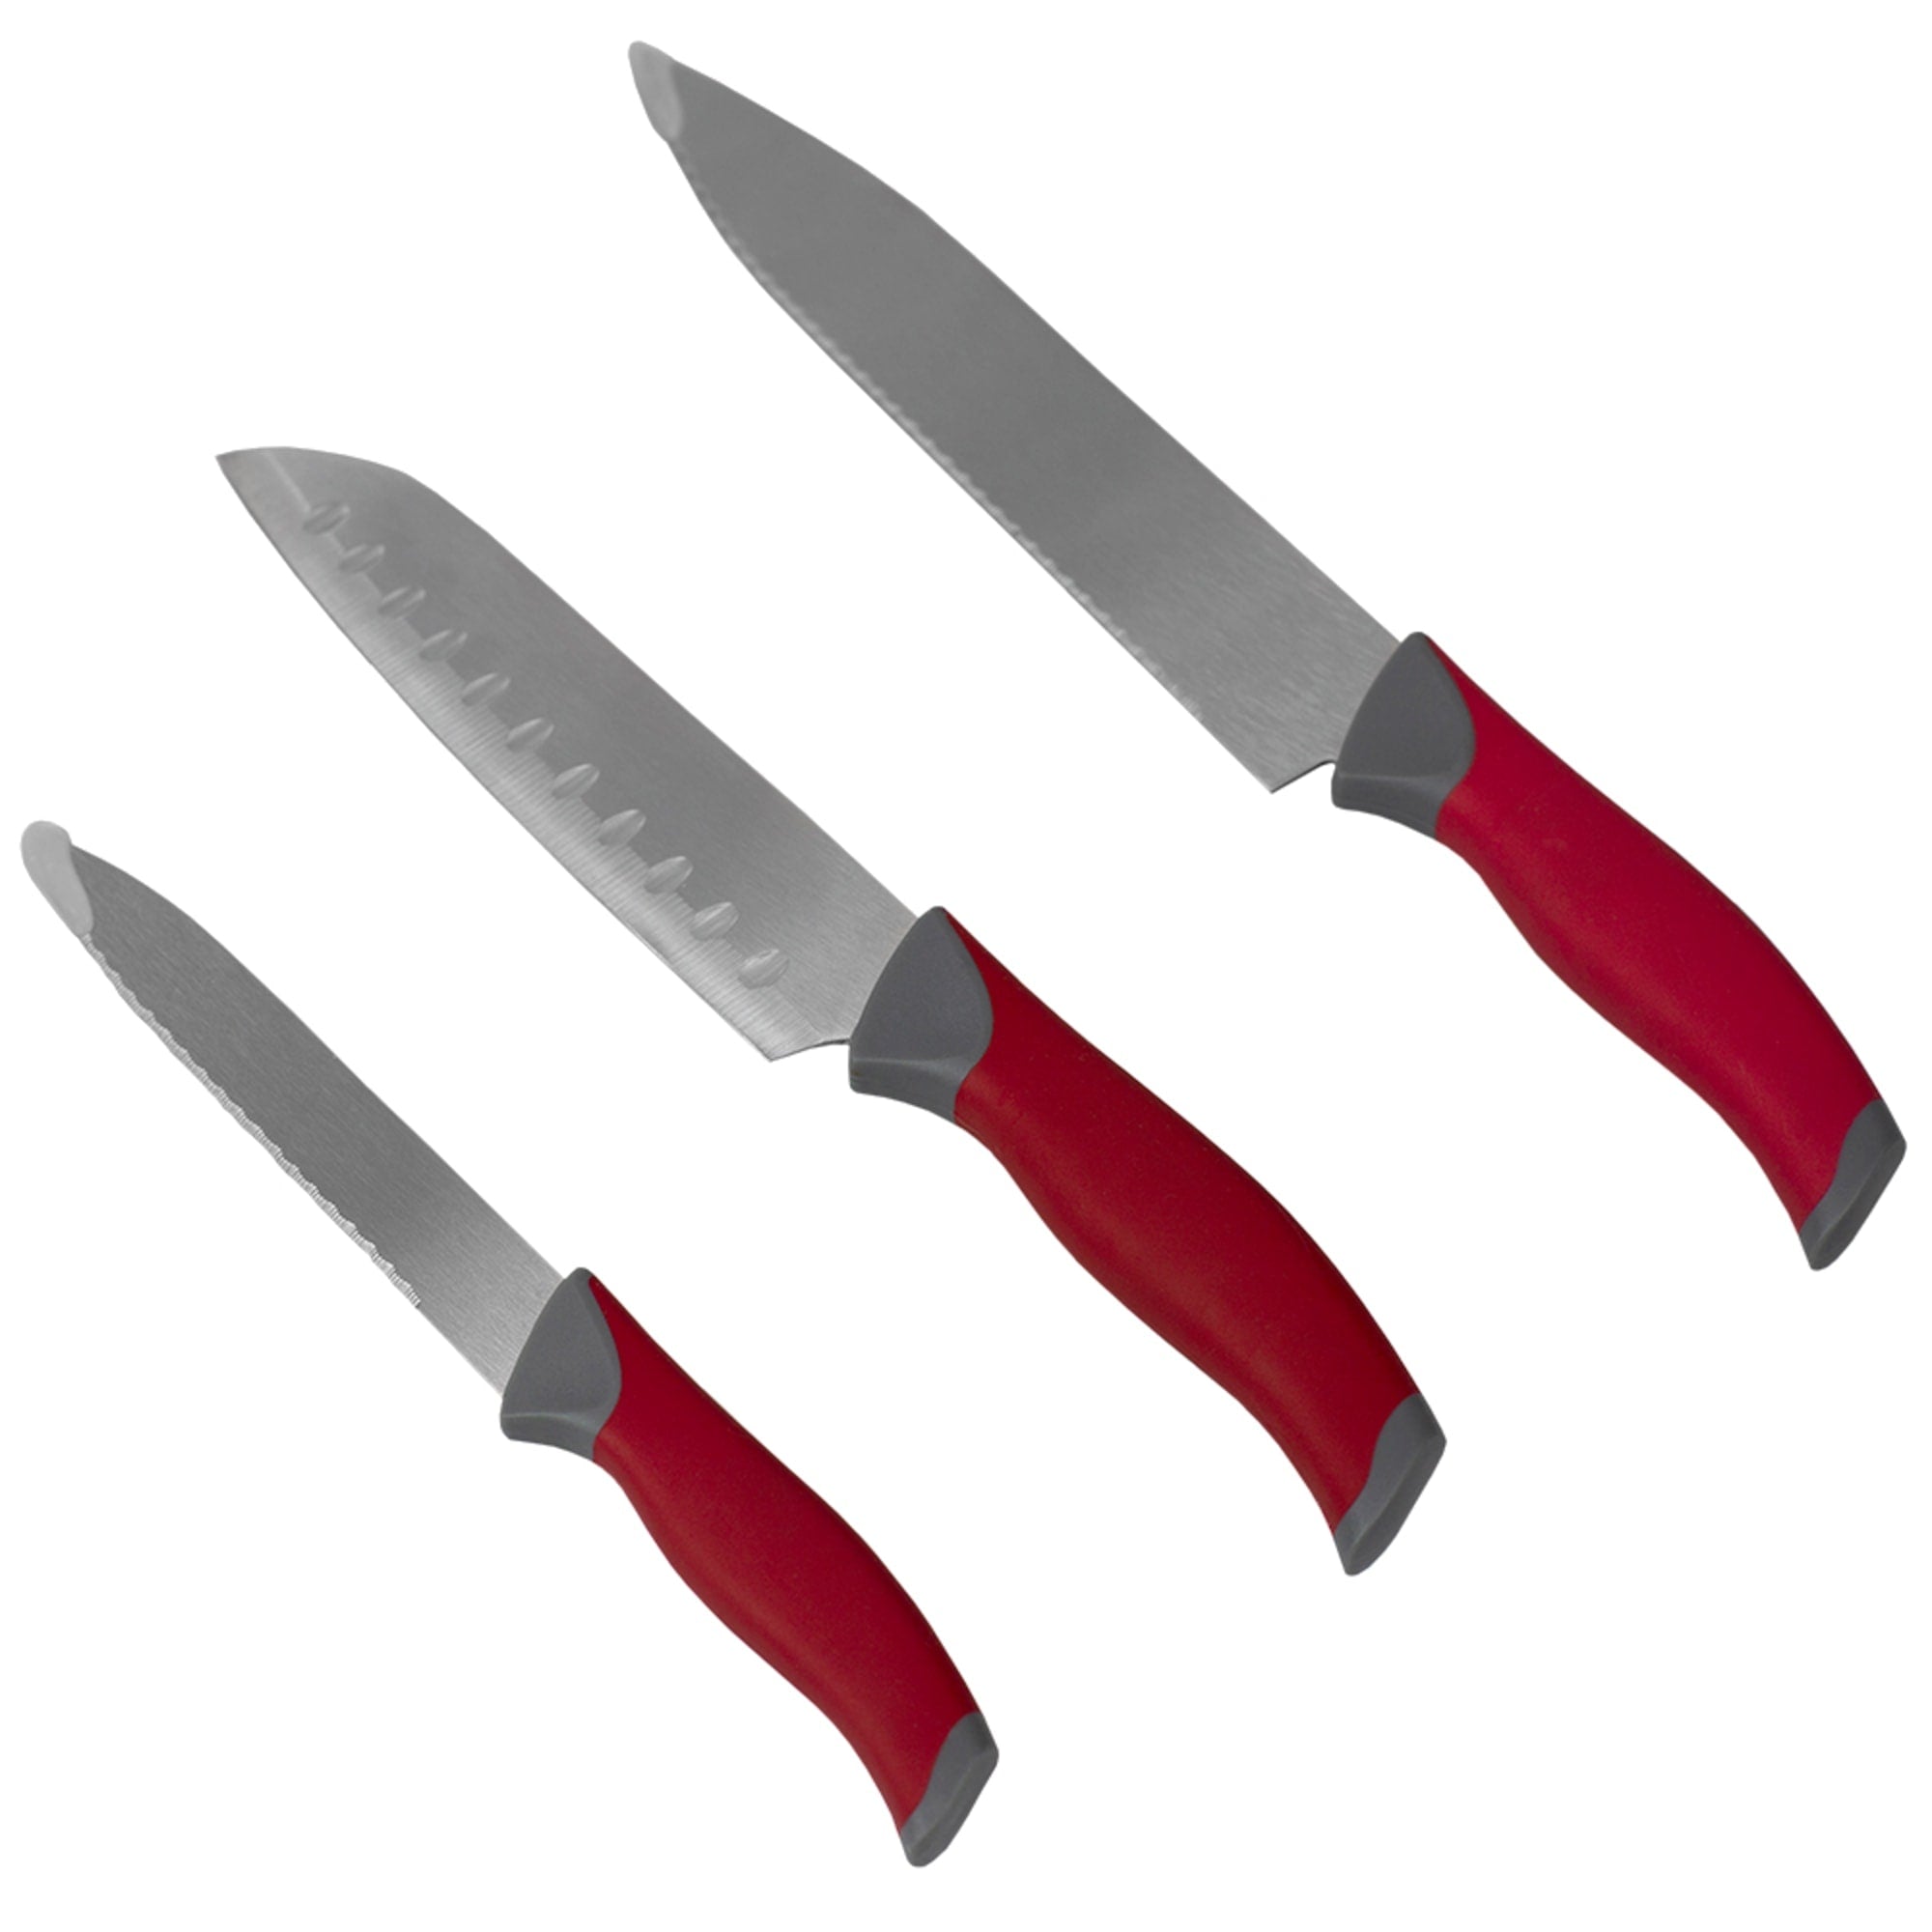 Home Basics Stainless Steel Knife Set with Non-Slip Handles and Protective Bolster, Red $5.00 EACH, CASE PACK OF 12